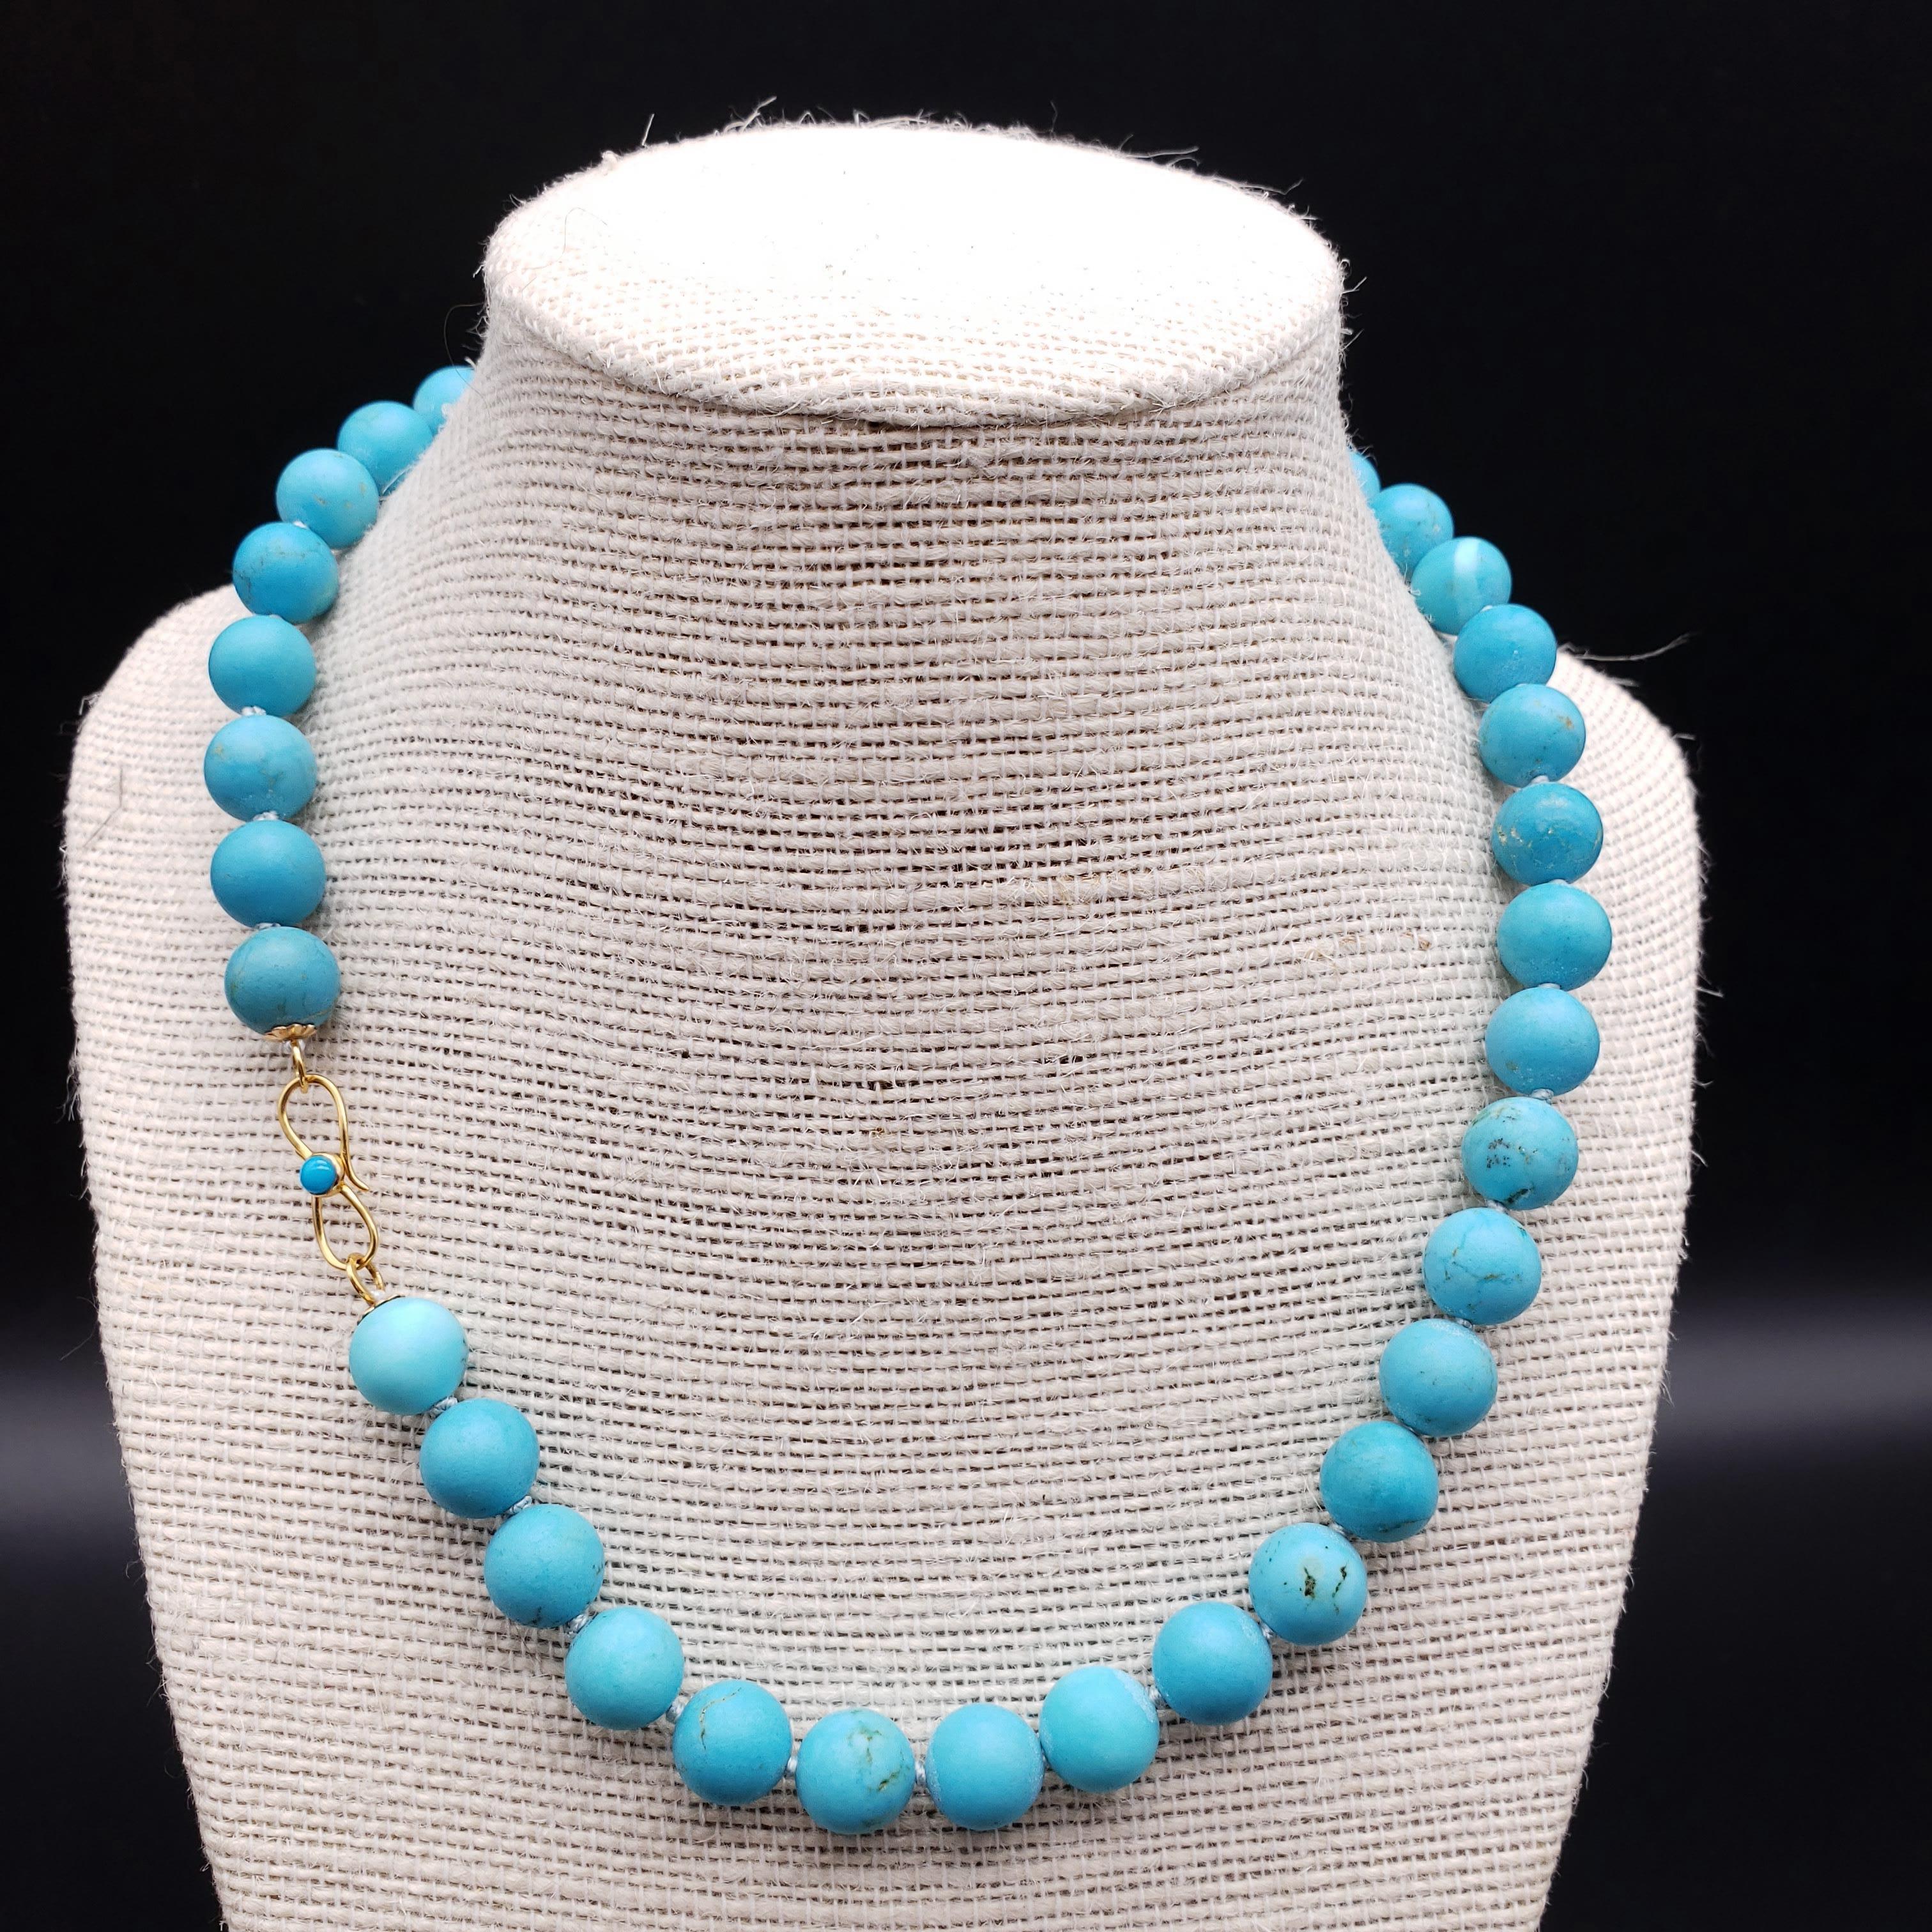 A regal necklace! Genuine sleeping beauty turquoise beads hang on a teal knotted string necklace, accented with a luxurious 18K yellow gold clasp.

Bead diameter approx 10mm
Hallmarks: 18K  